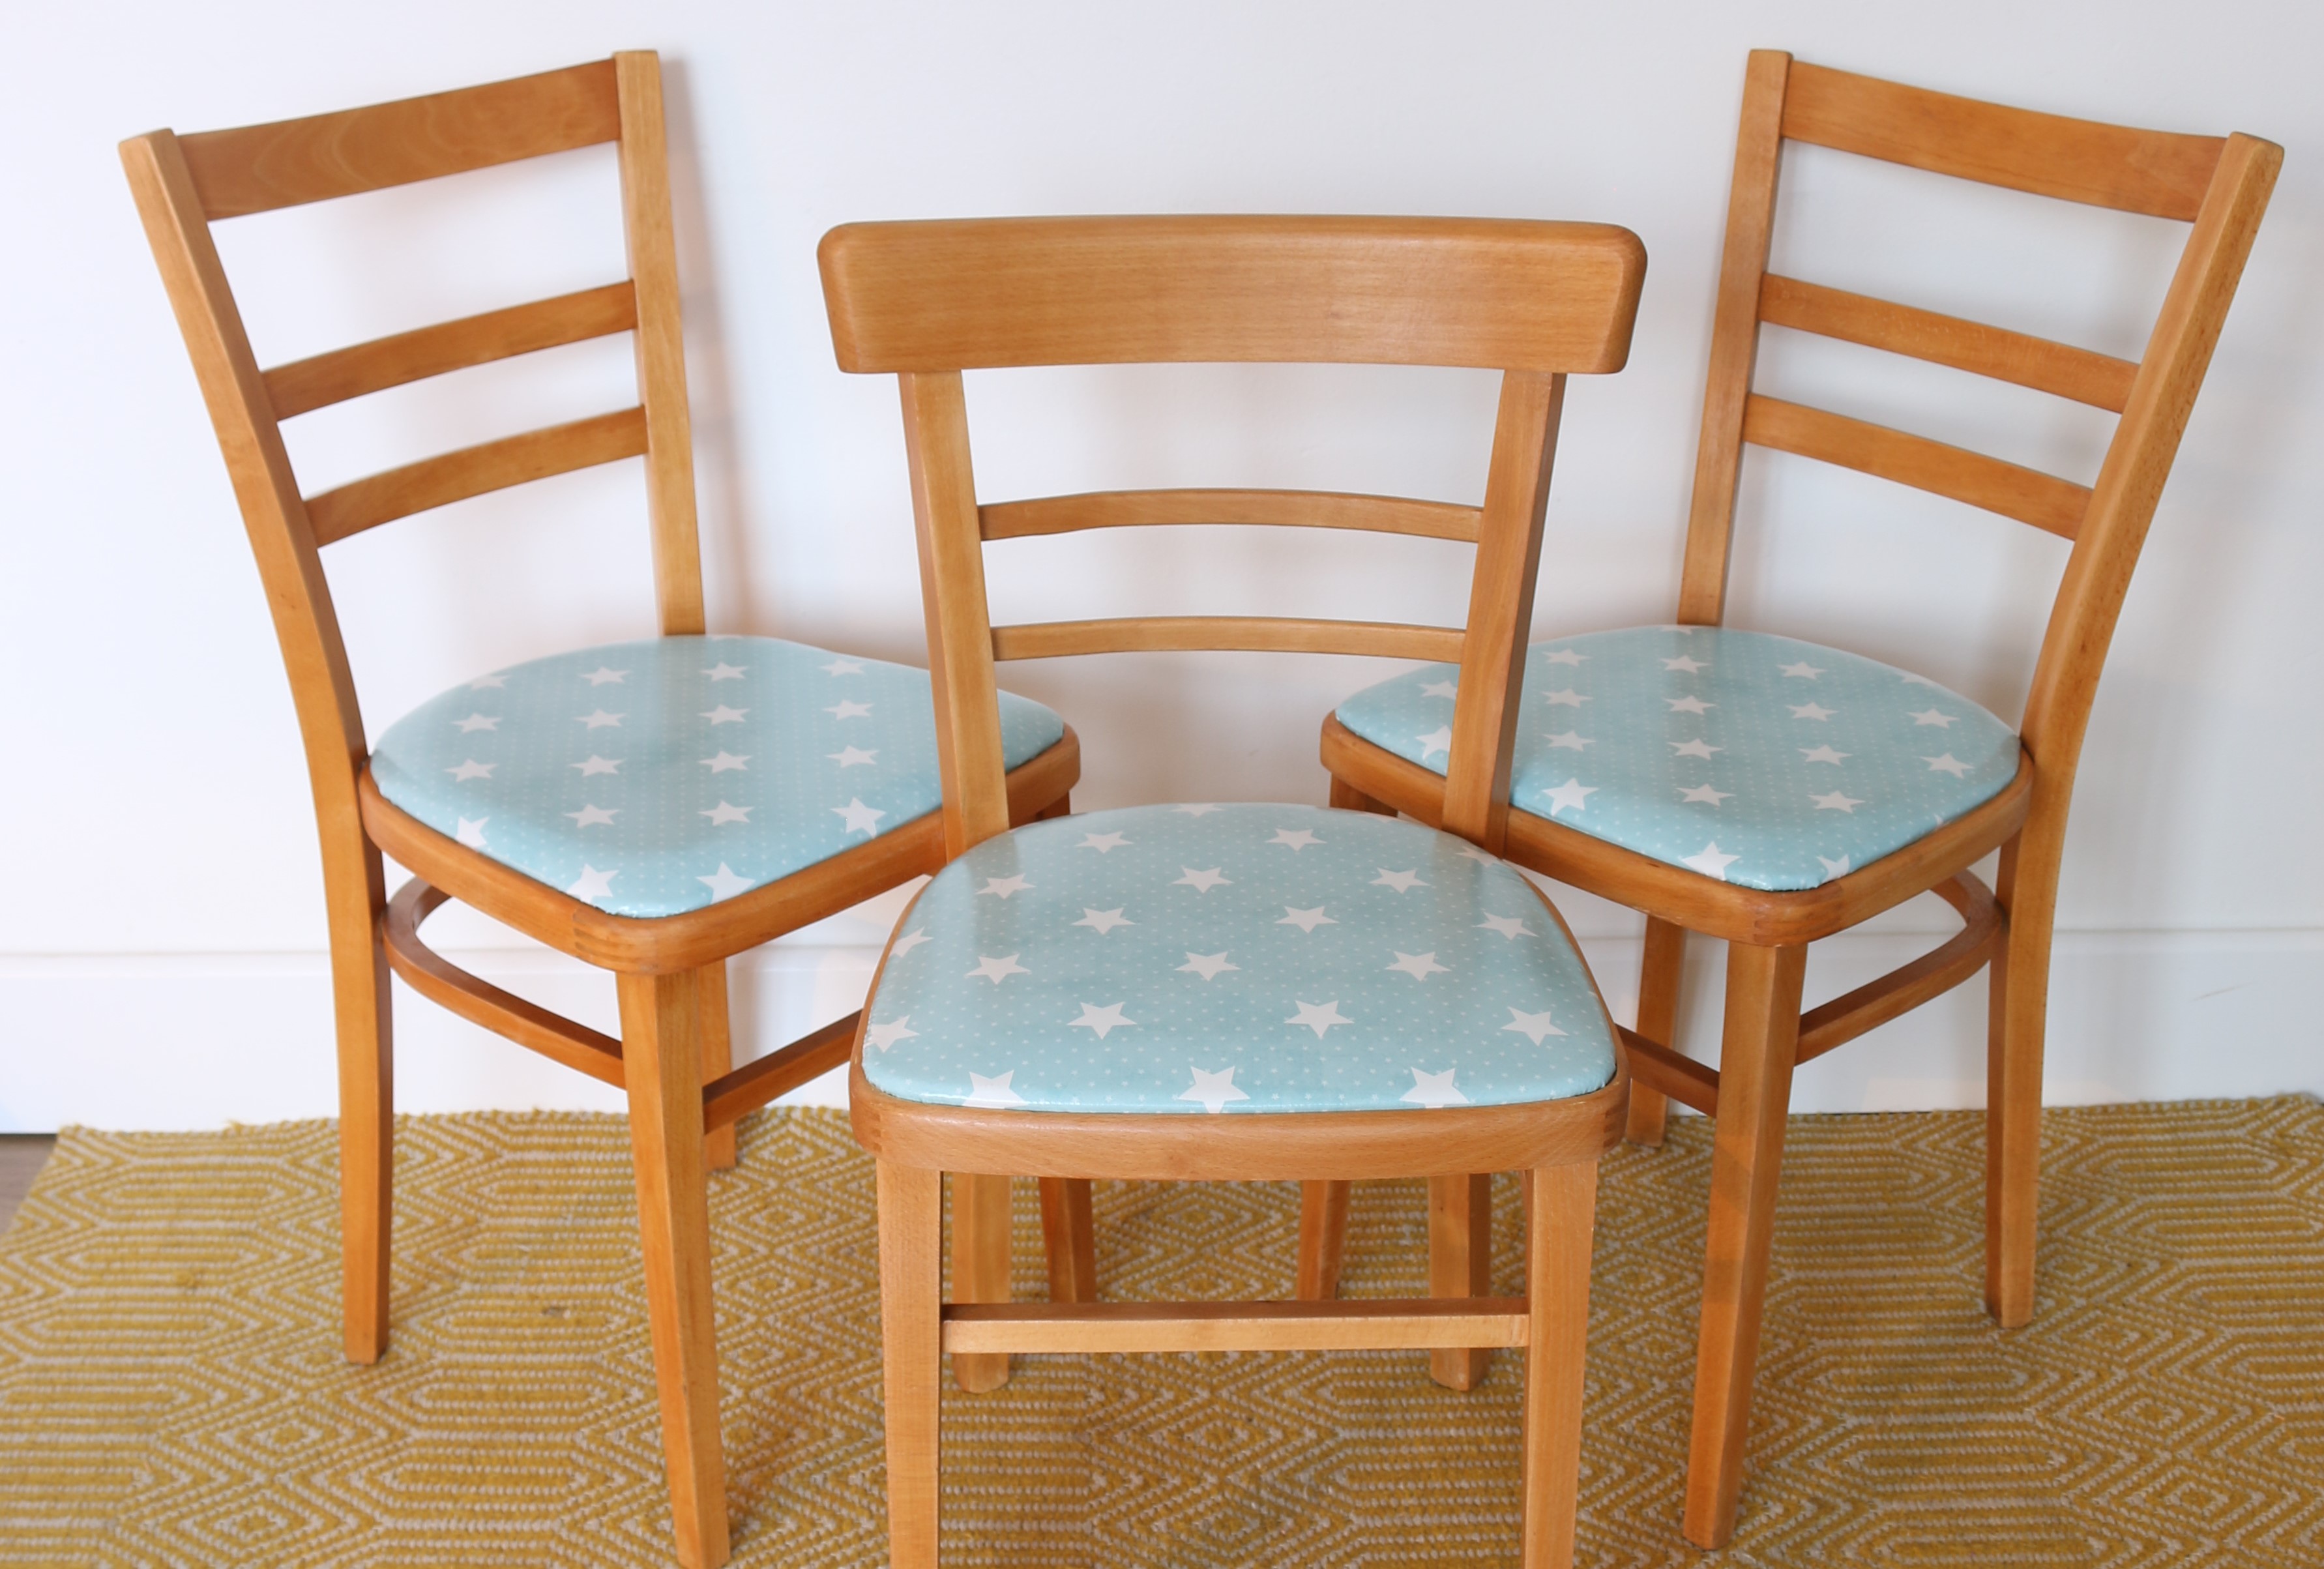 Step By Step Video To Restore Vintage Kitchen Chairs